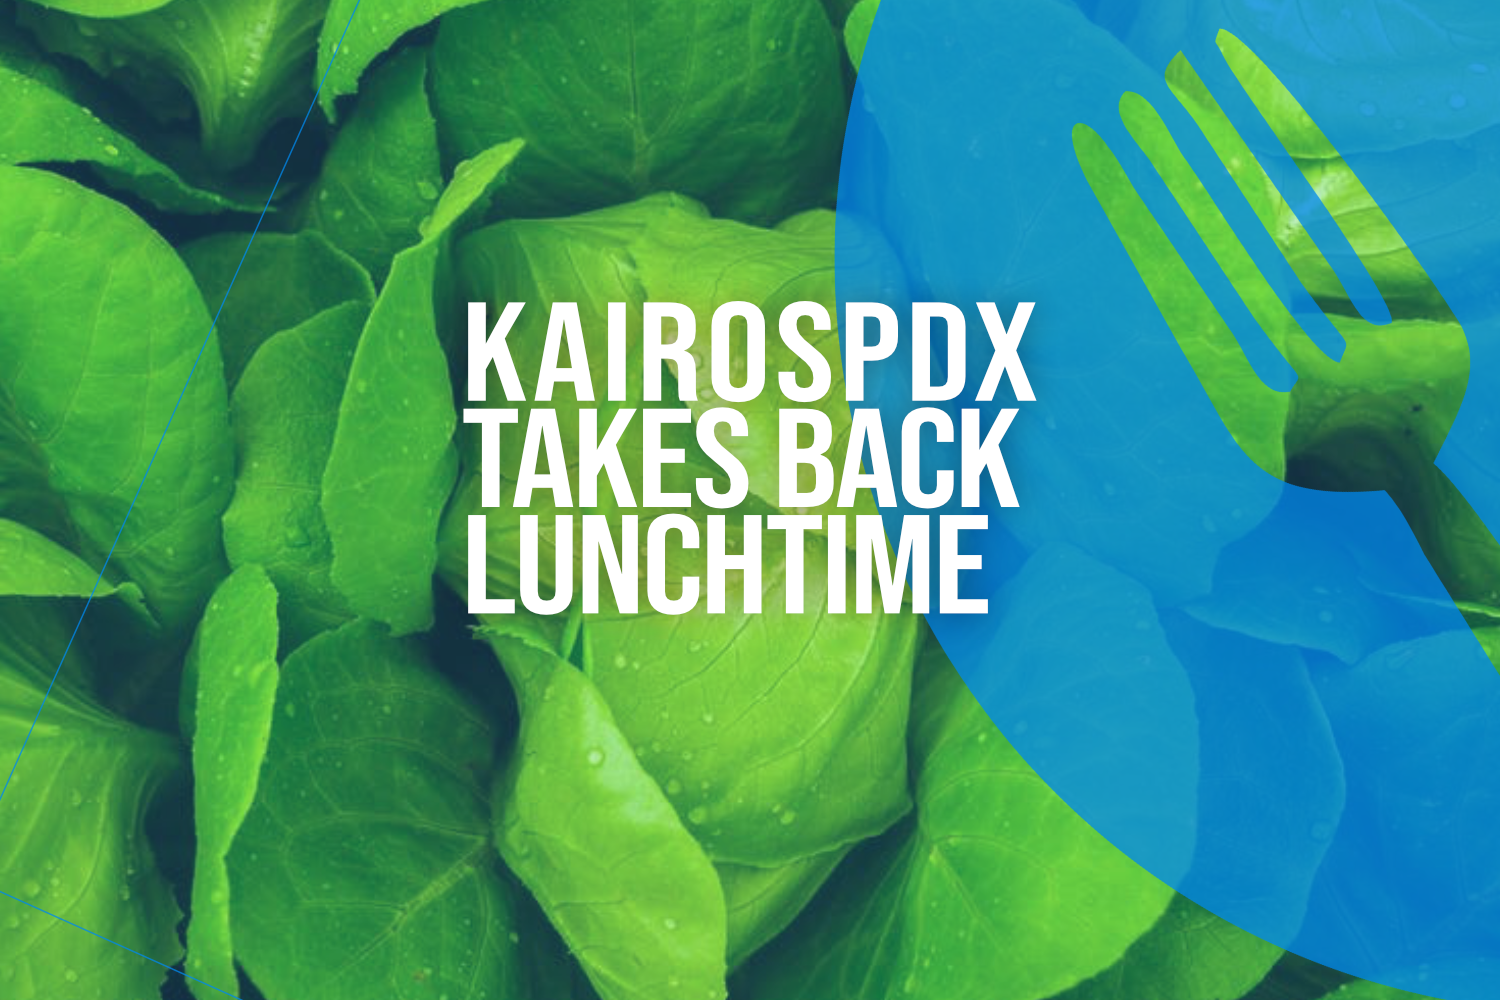 Goodbye to Sloppy Joes, KairosPDX Changes up Lunch 